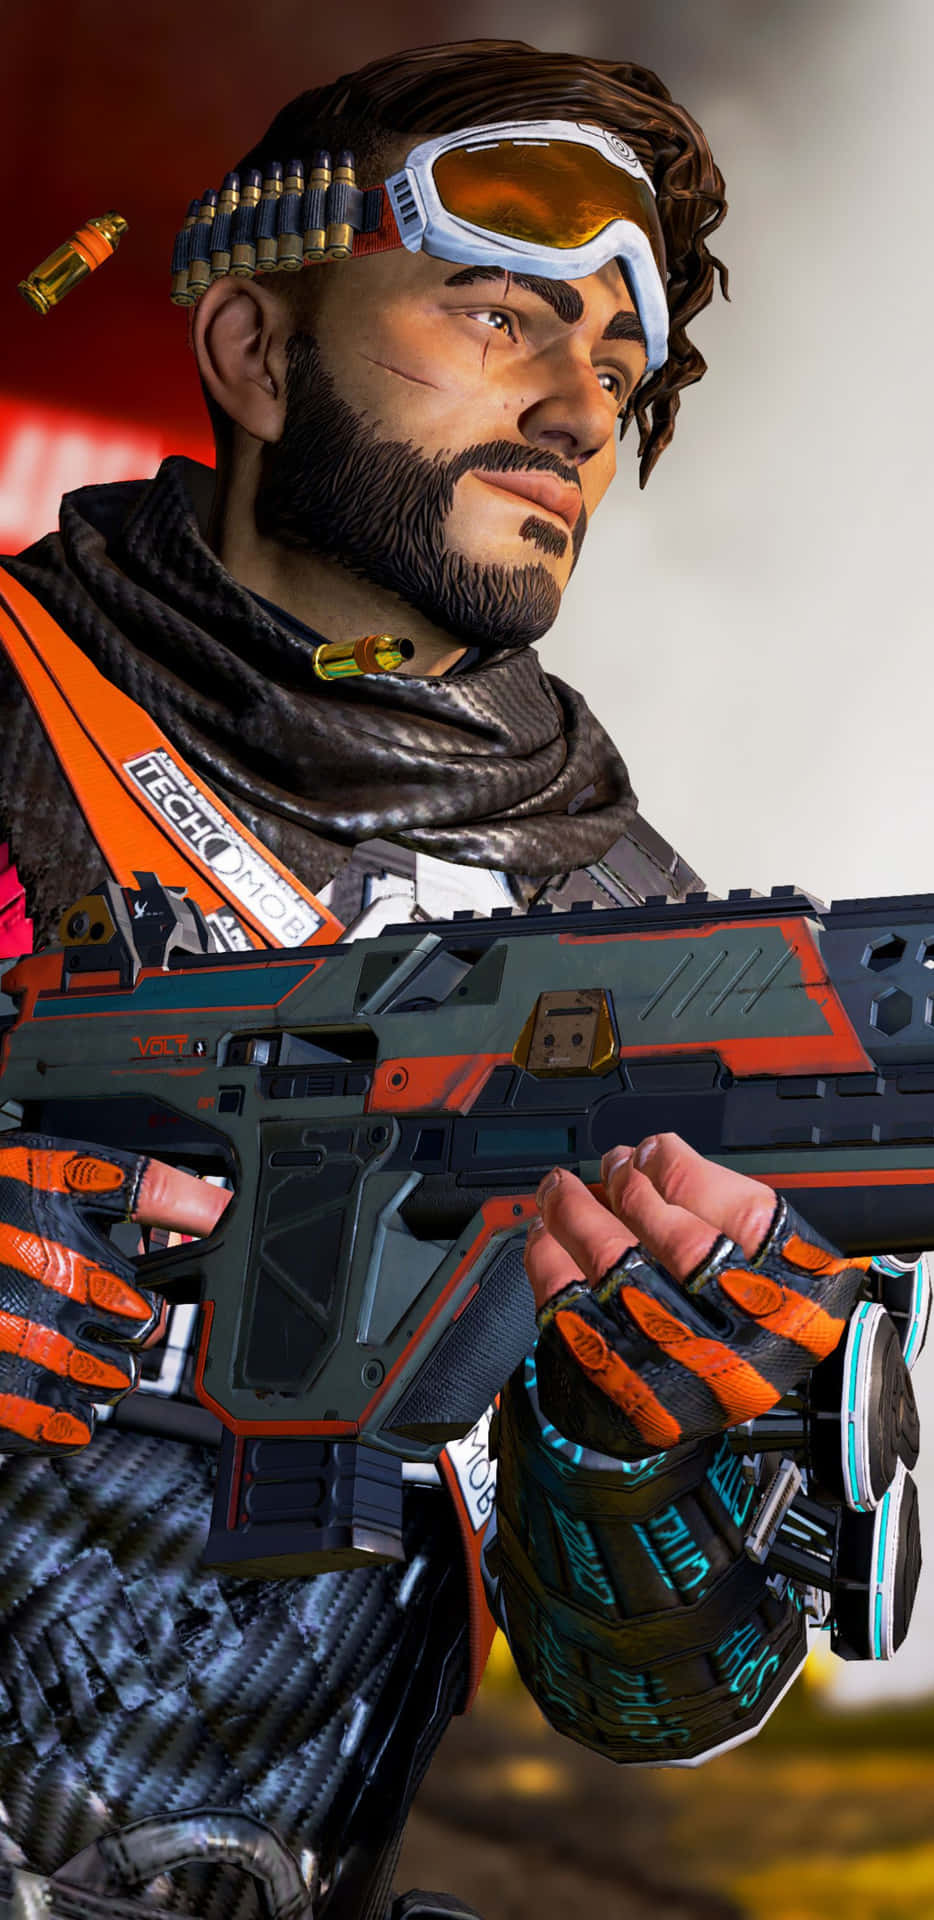 Get Ready For a Heart-Pumping Battle with Pixel 3 XL and Apex Legends